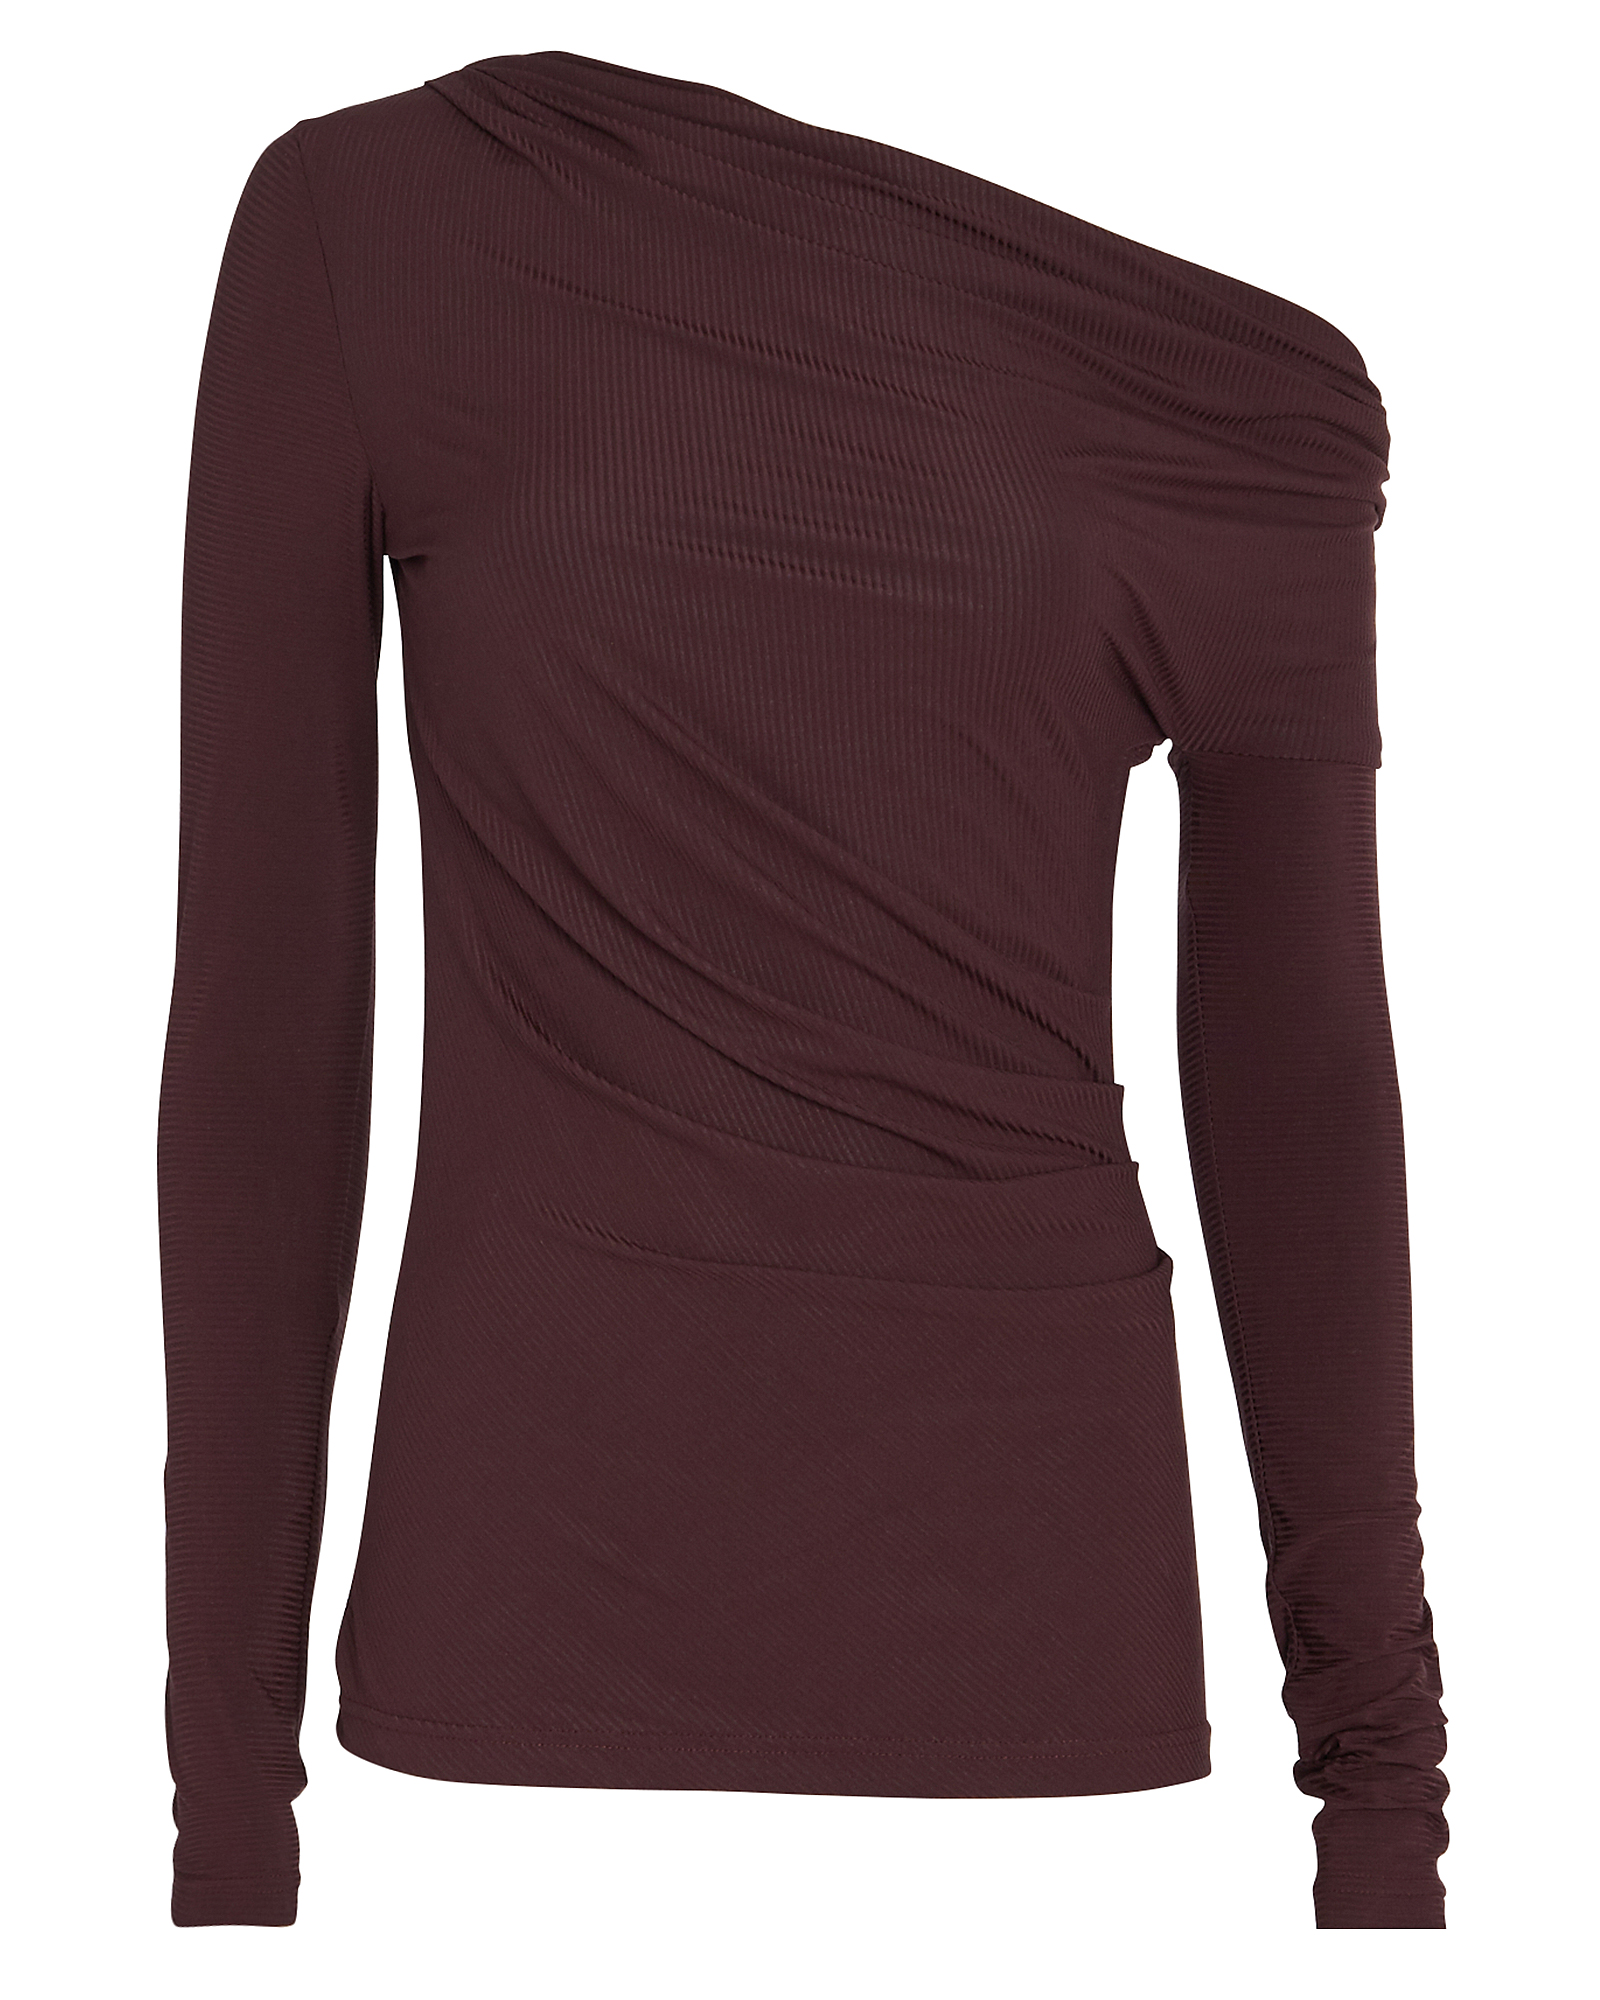 Acler | One-Shoulder Rib Knit Top | INTERMIX®